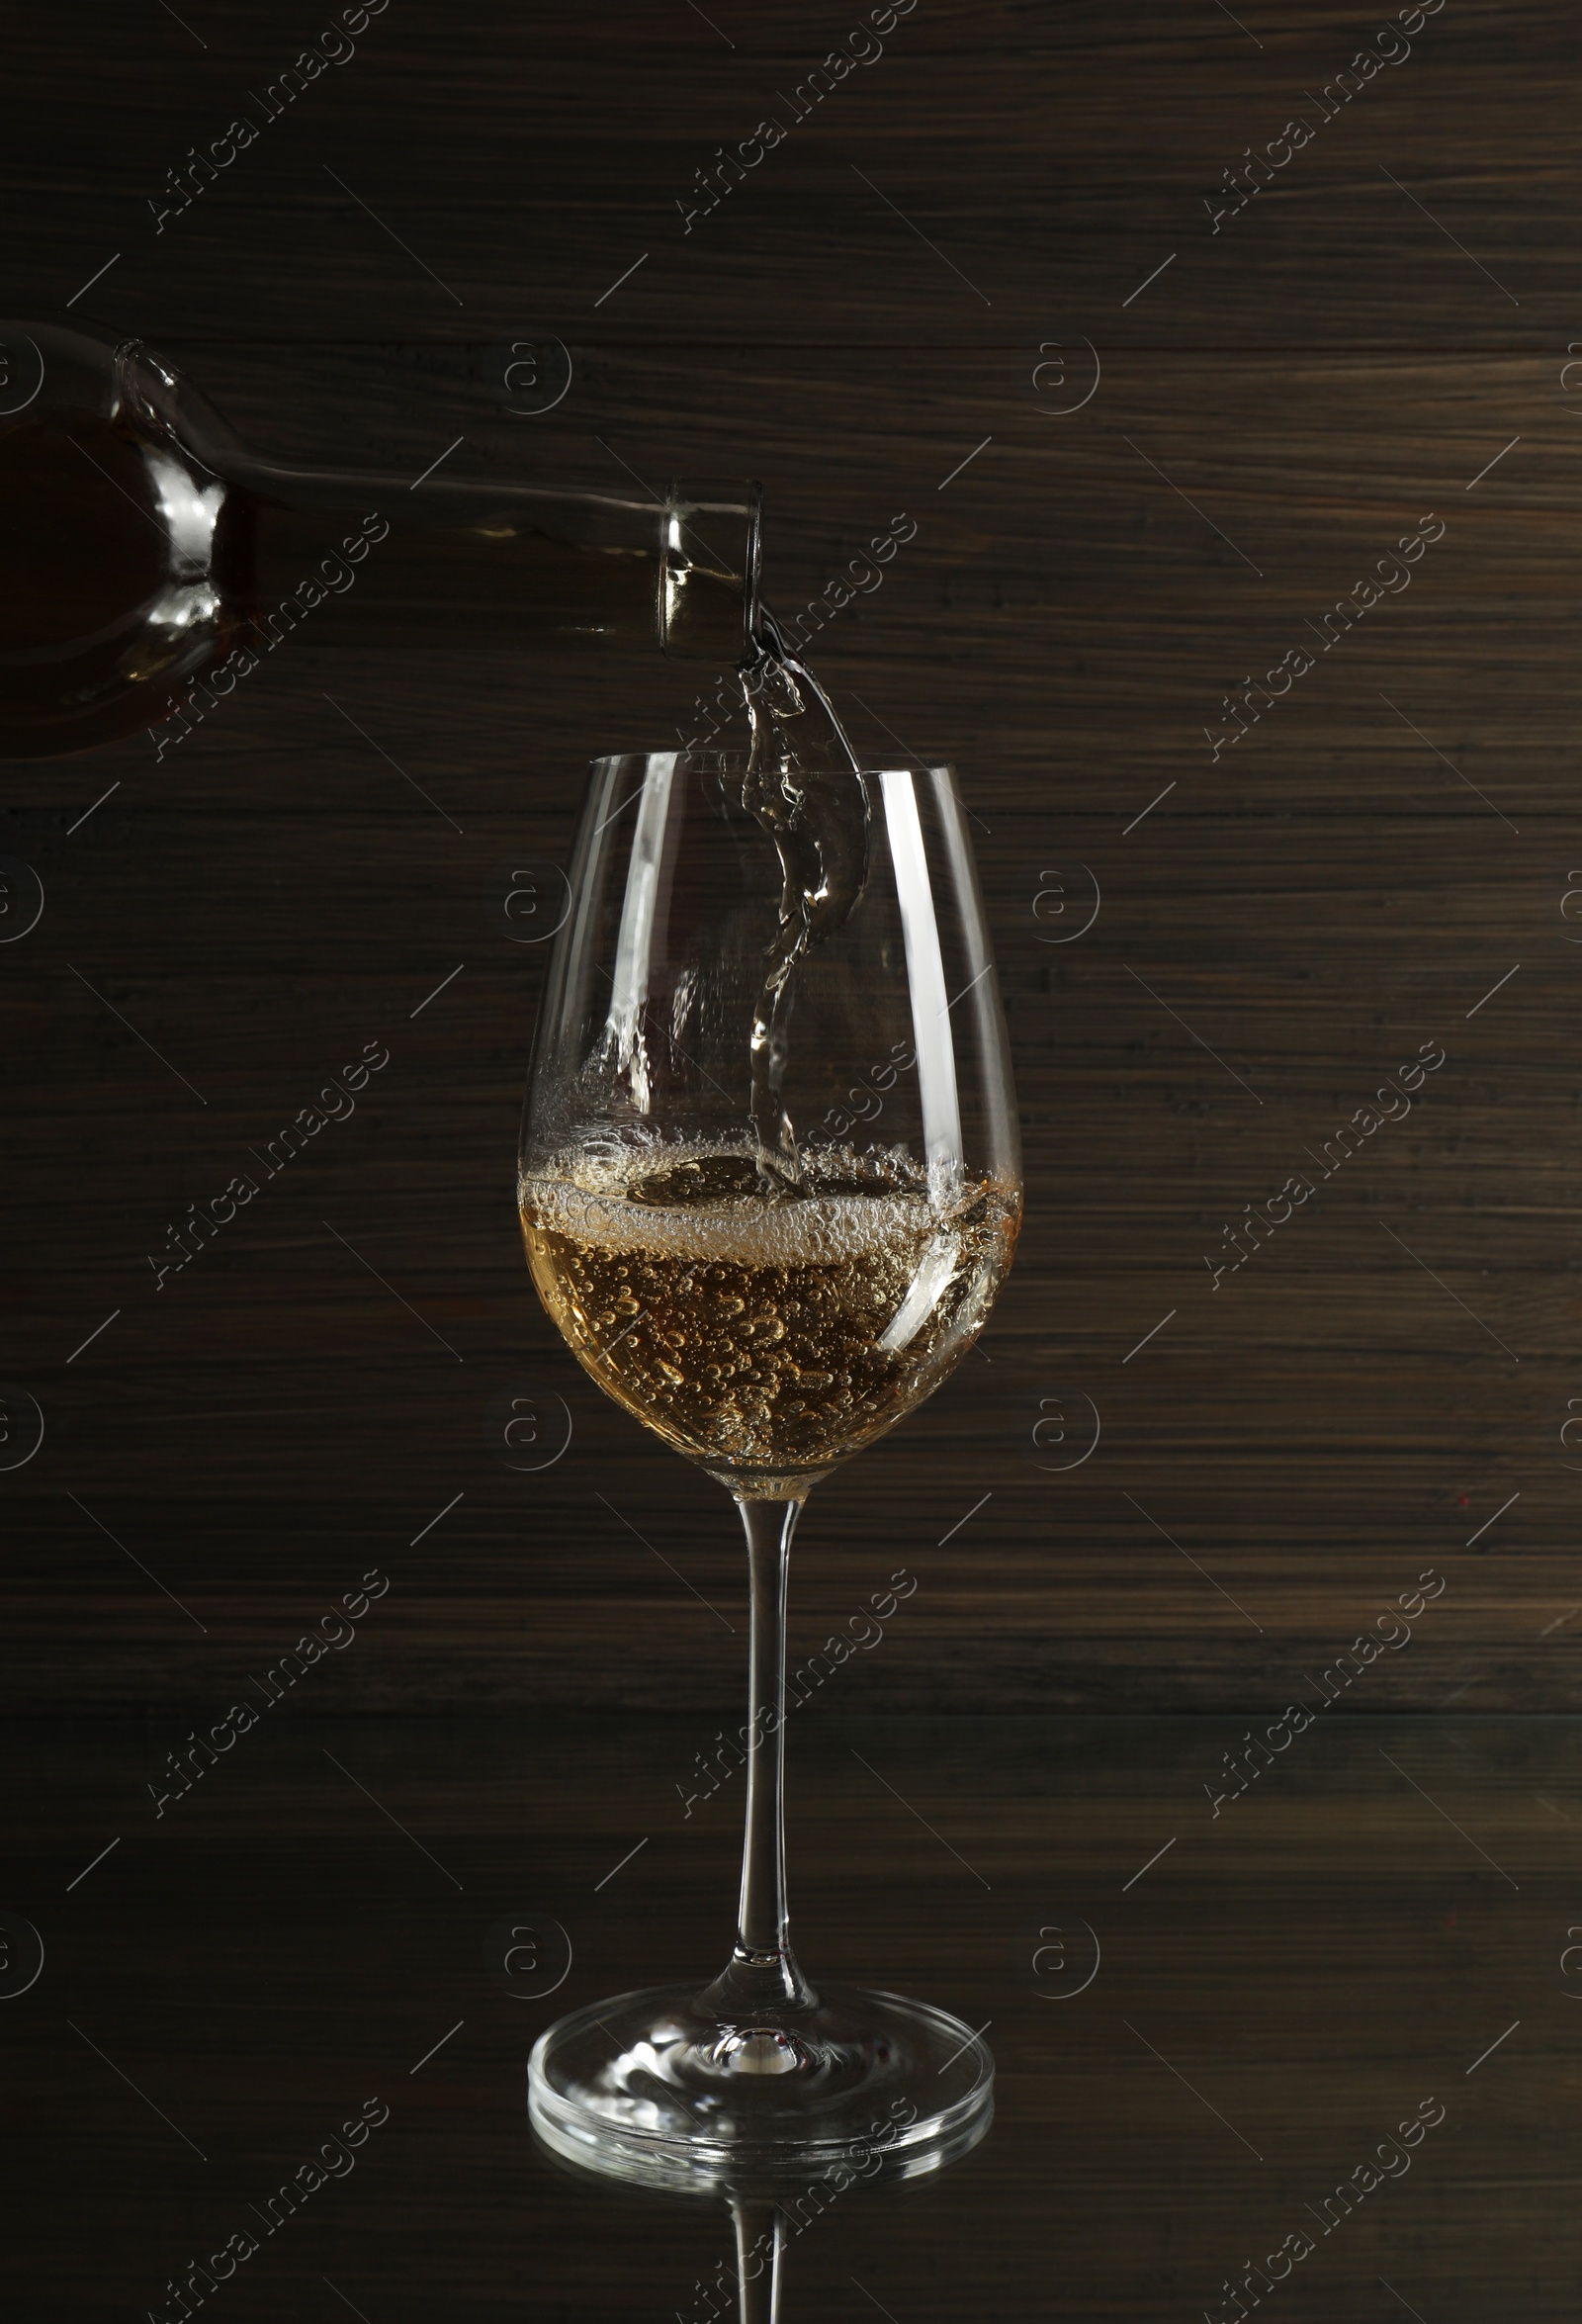 Photo of Pouring white wine from bottle into glass on table against wooden background